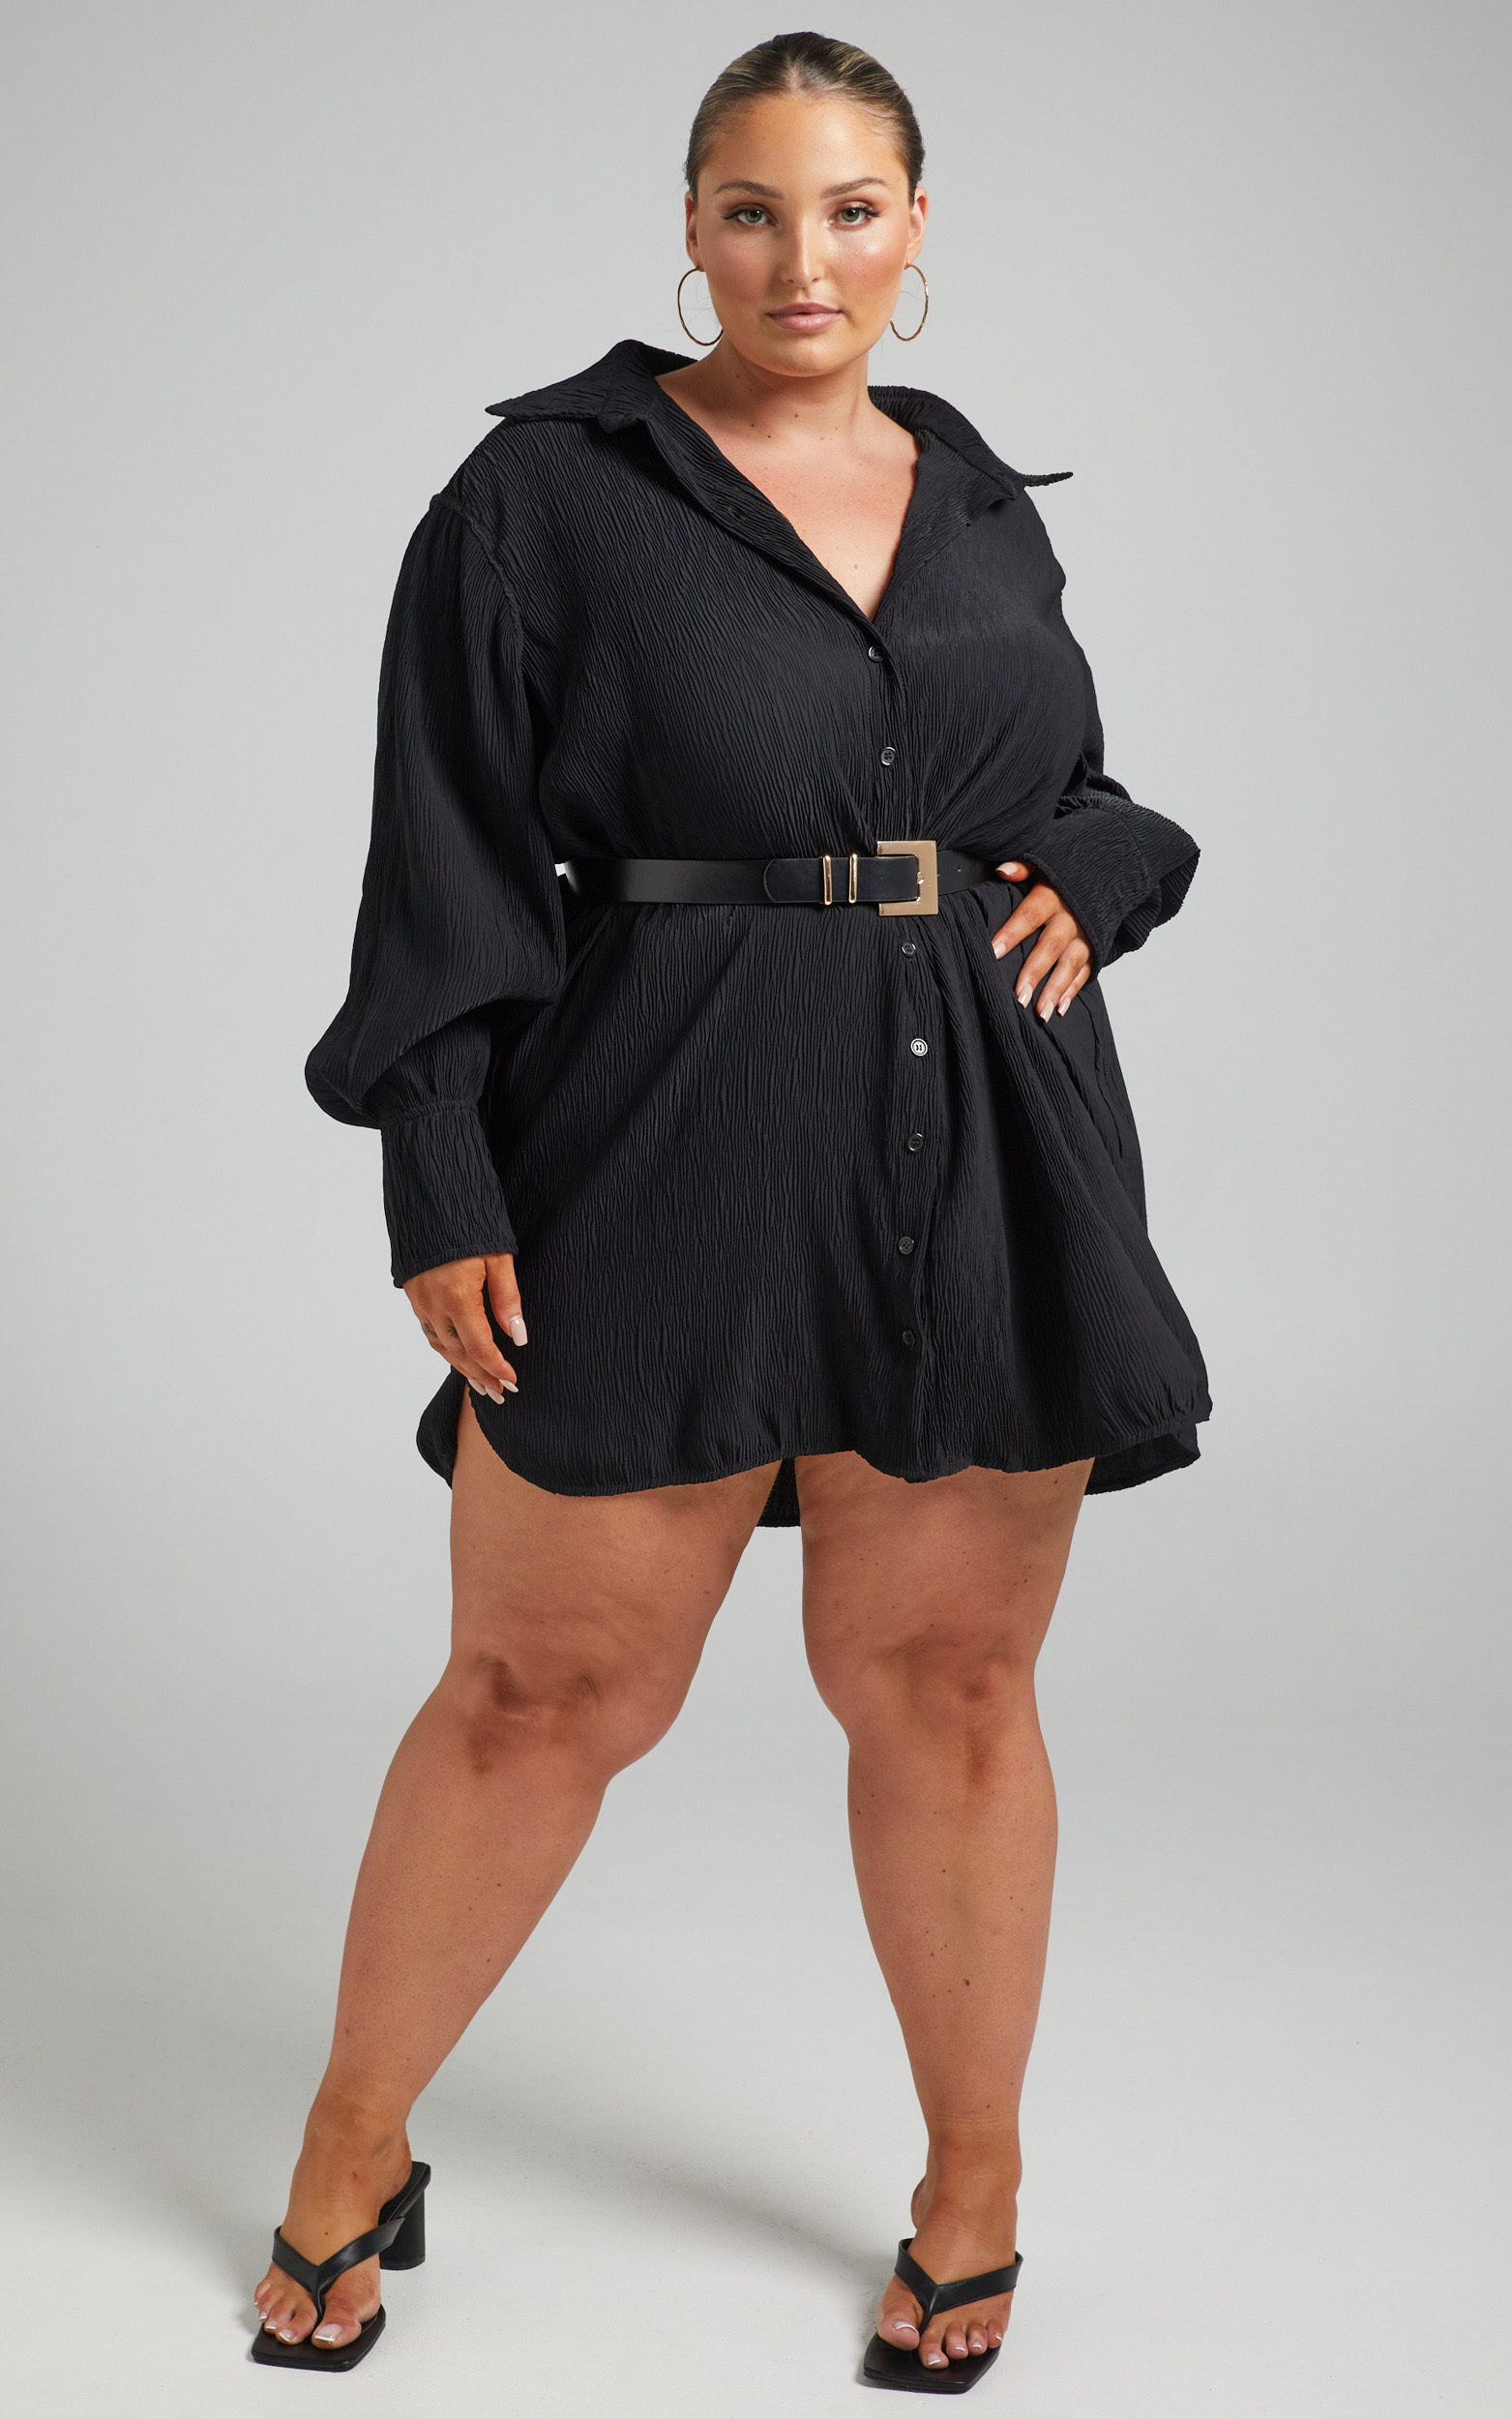 Simae Textured Button Up Shirt Dress in Black - 04, BLK1, hi-res image number null